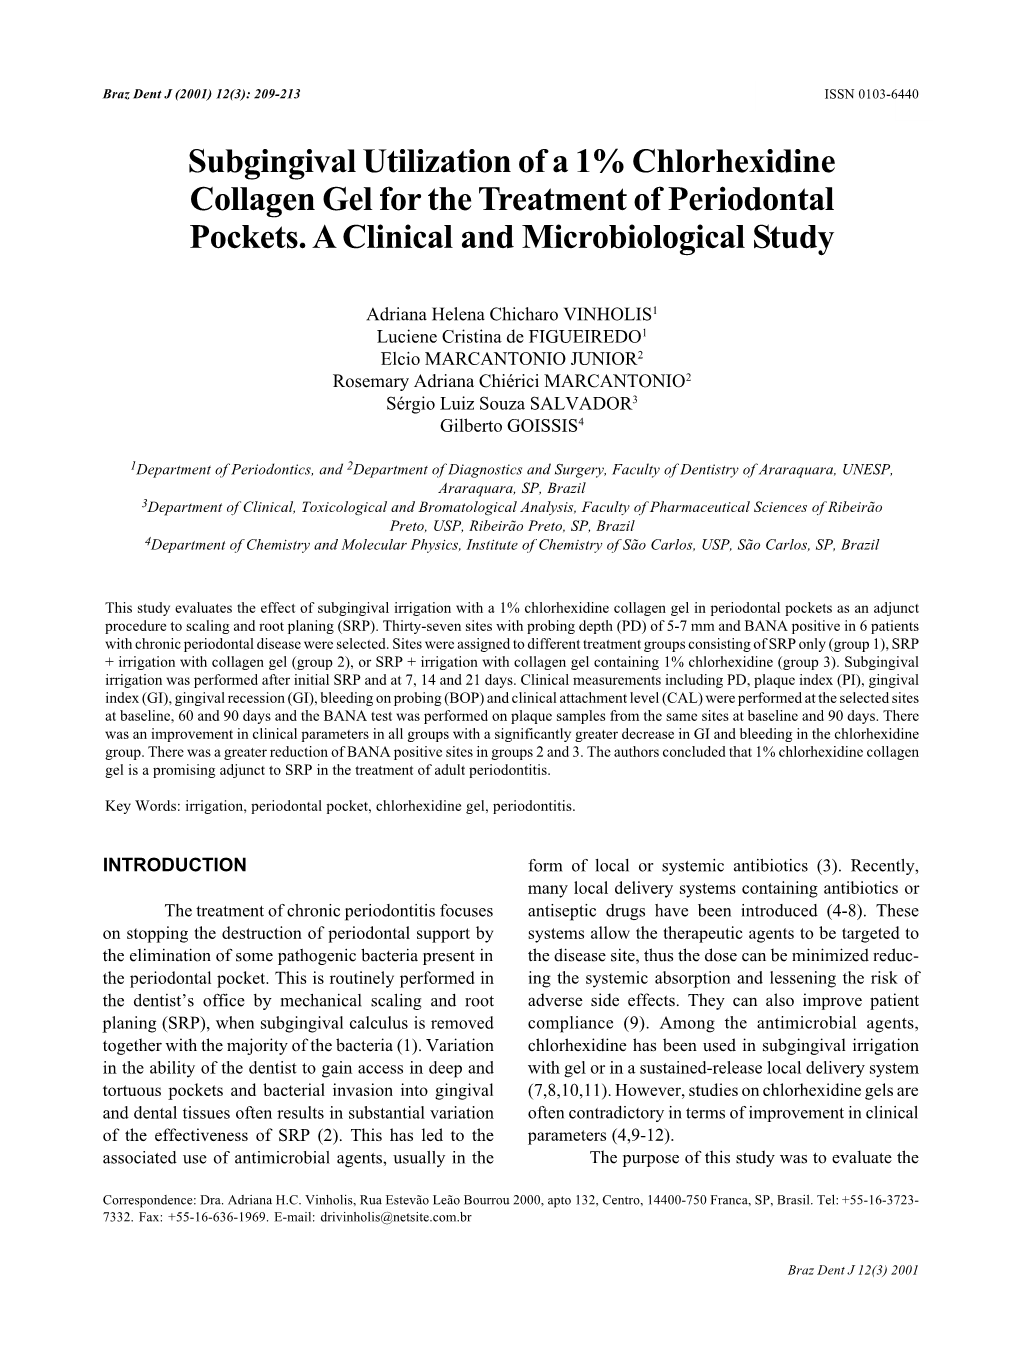 Subgingival Utilization of a 1% Chlorhexidine Collagen Gel for the Treatment of Periodontal Pockets